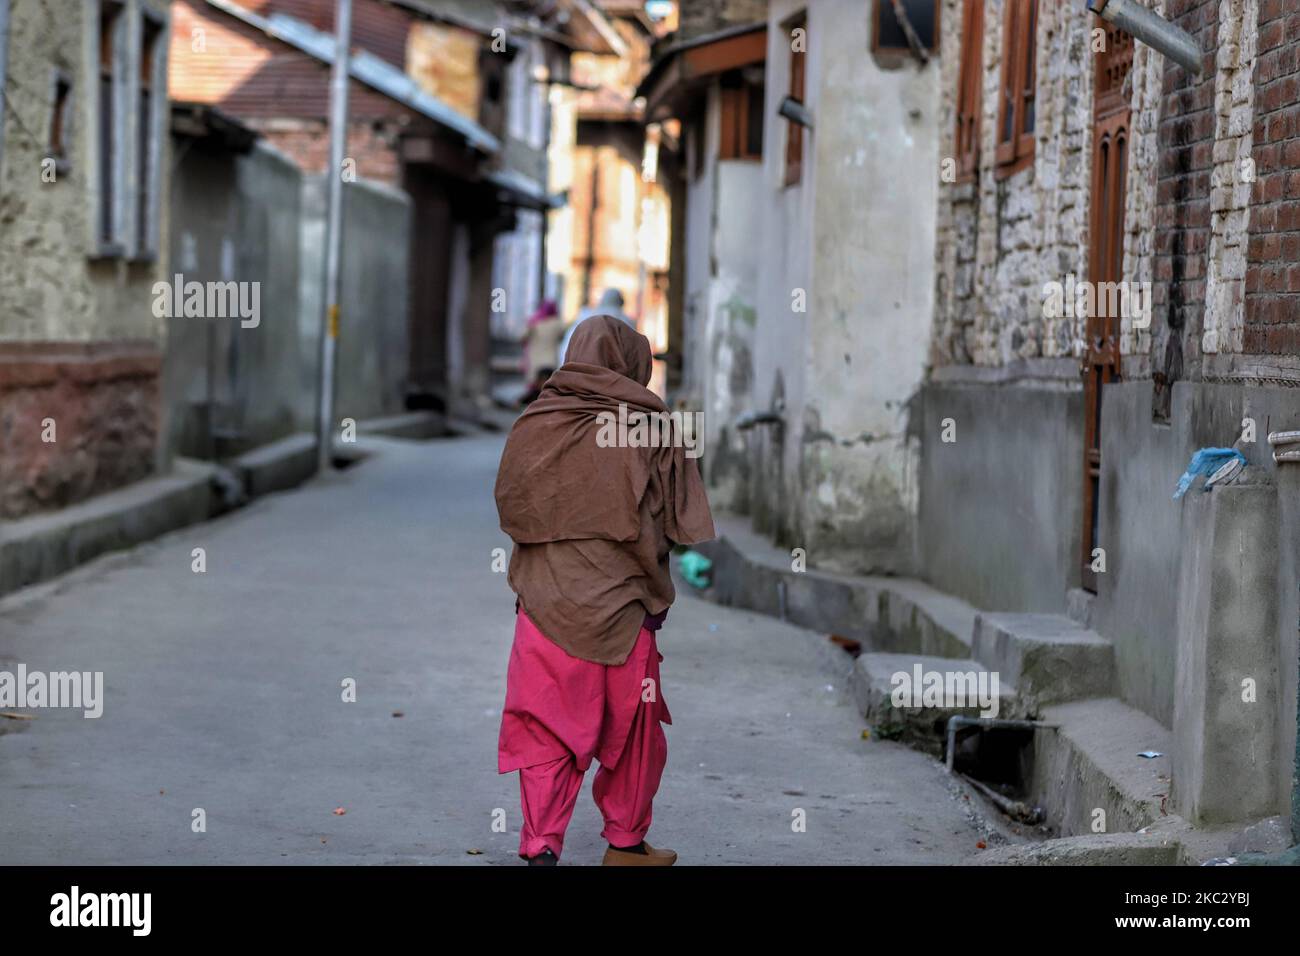 A woman walks through a narrow lane in District Baramulla, Jammu and Kashmir, India on 30 October 2020. As the anger grows in Jammu and Kashmir over the new land laws, which allow any Indian citizen to buy land in the Union territory, the separatist Hurriyat Conference on Wednesday broke its silence and called for a one-day shutdown on October 31 to protest the â€œanti-people movesâ€ by New Delhi. (Photo by Nasir Kachroo/NurPhoto) Stock Photo